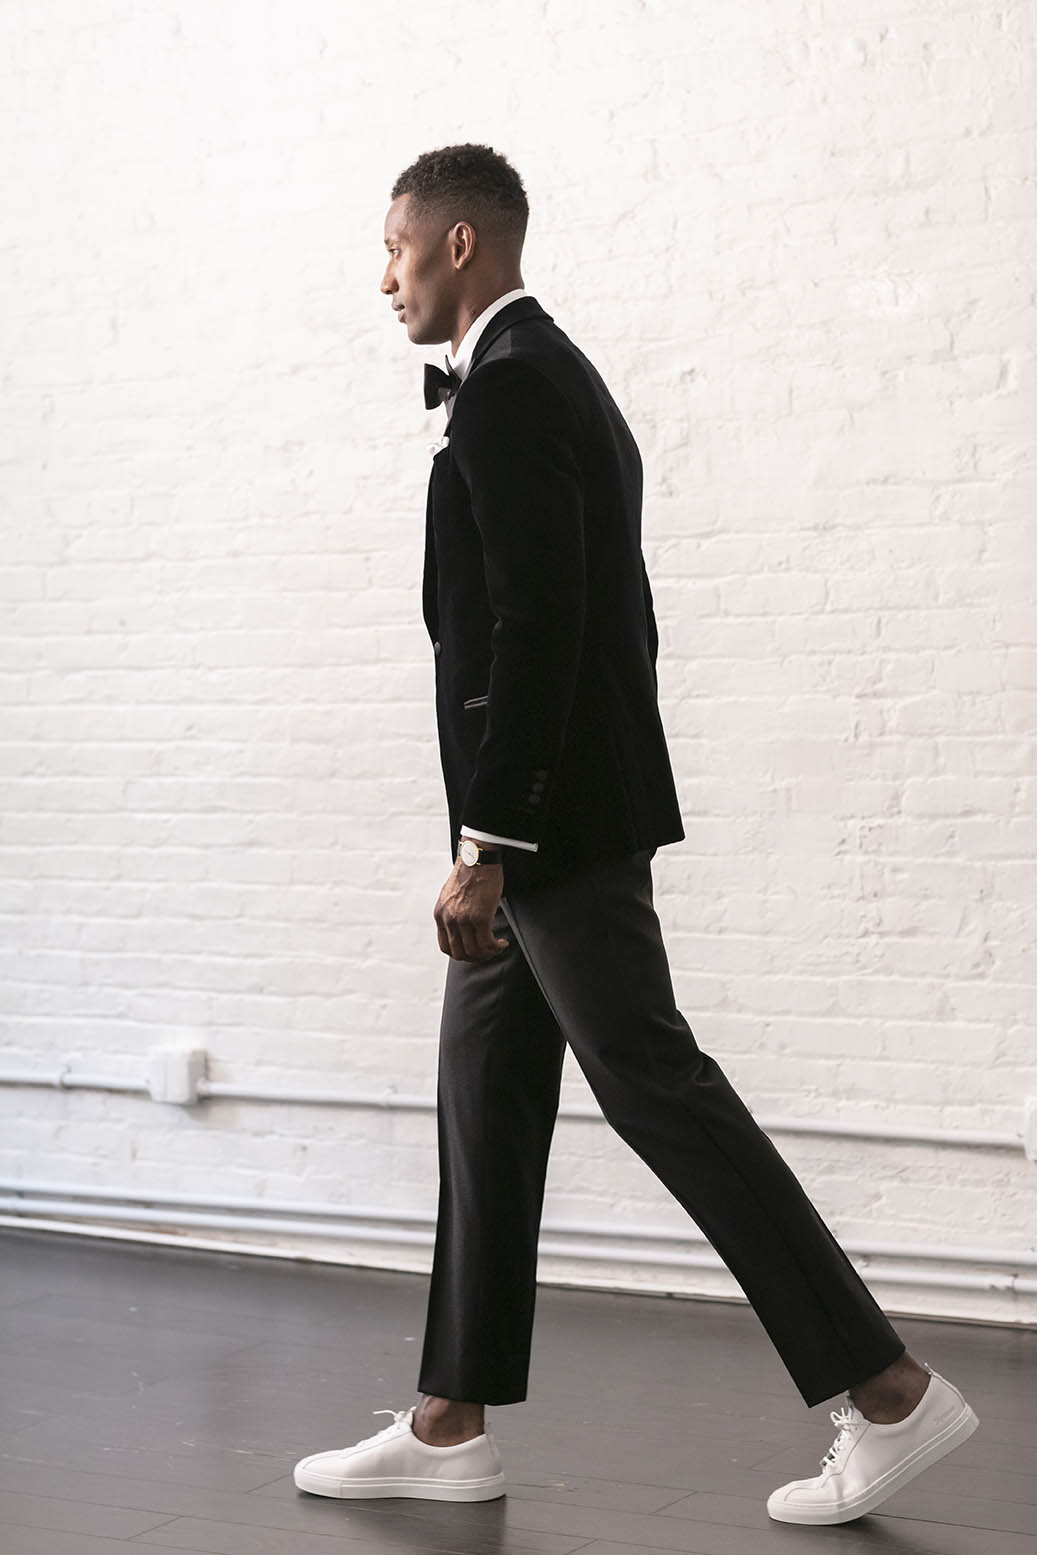 Black Suit And Brown Shoes For Men Images Independence